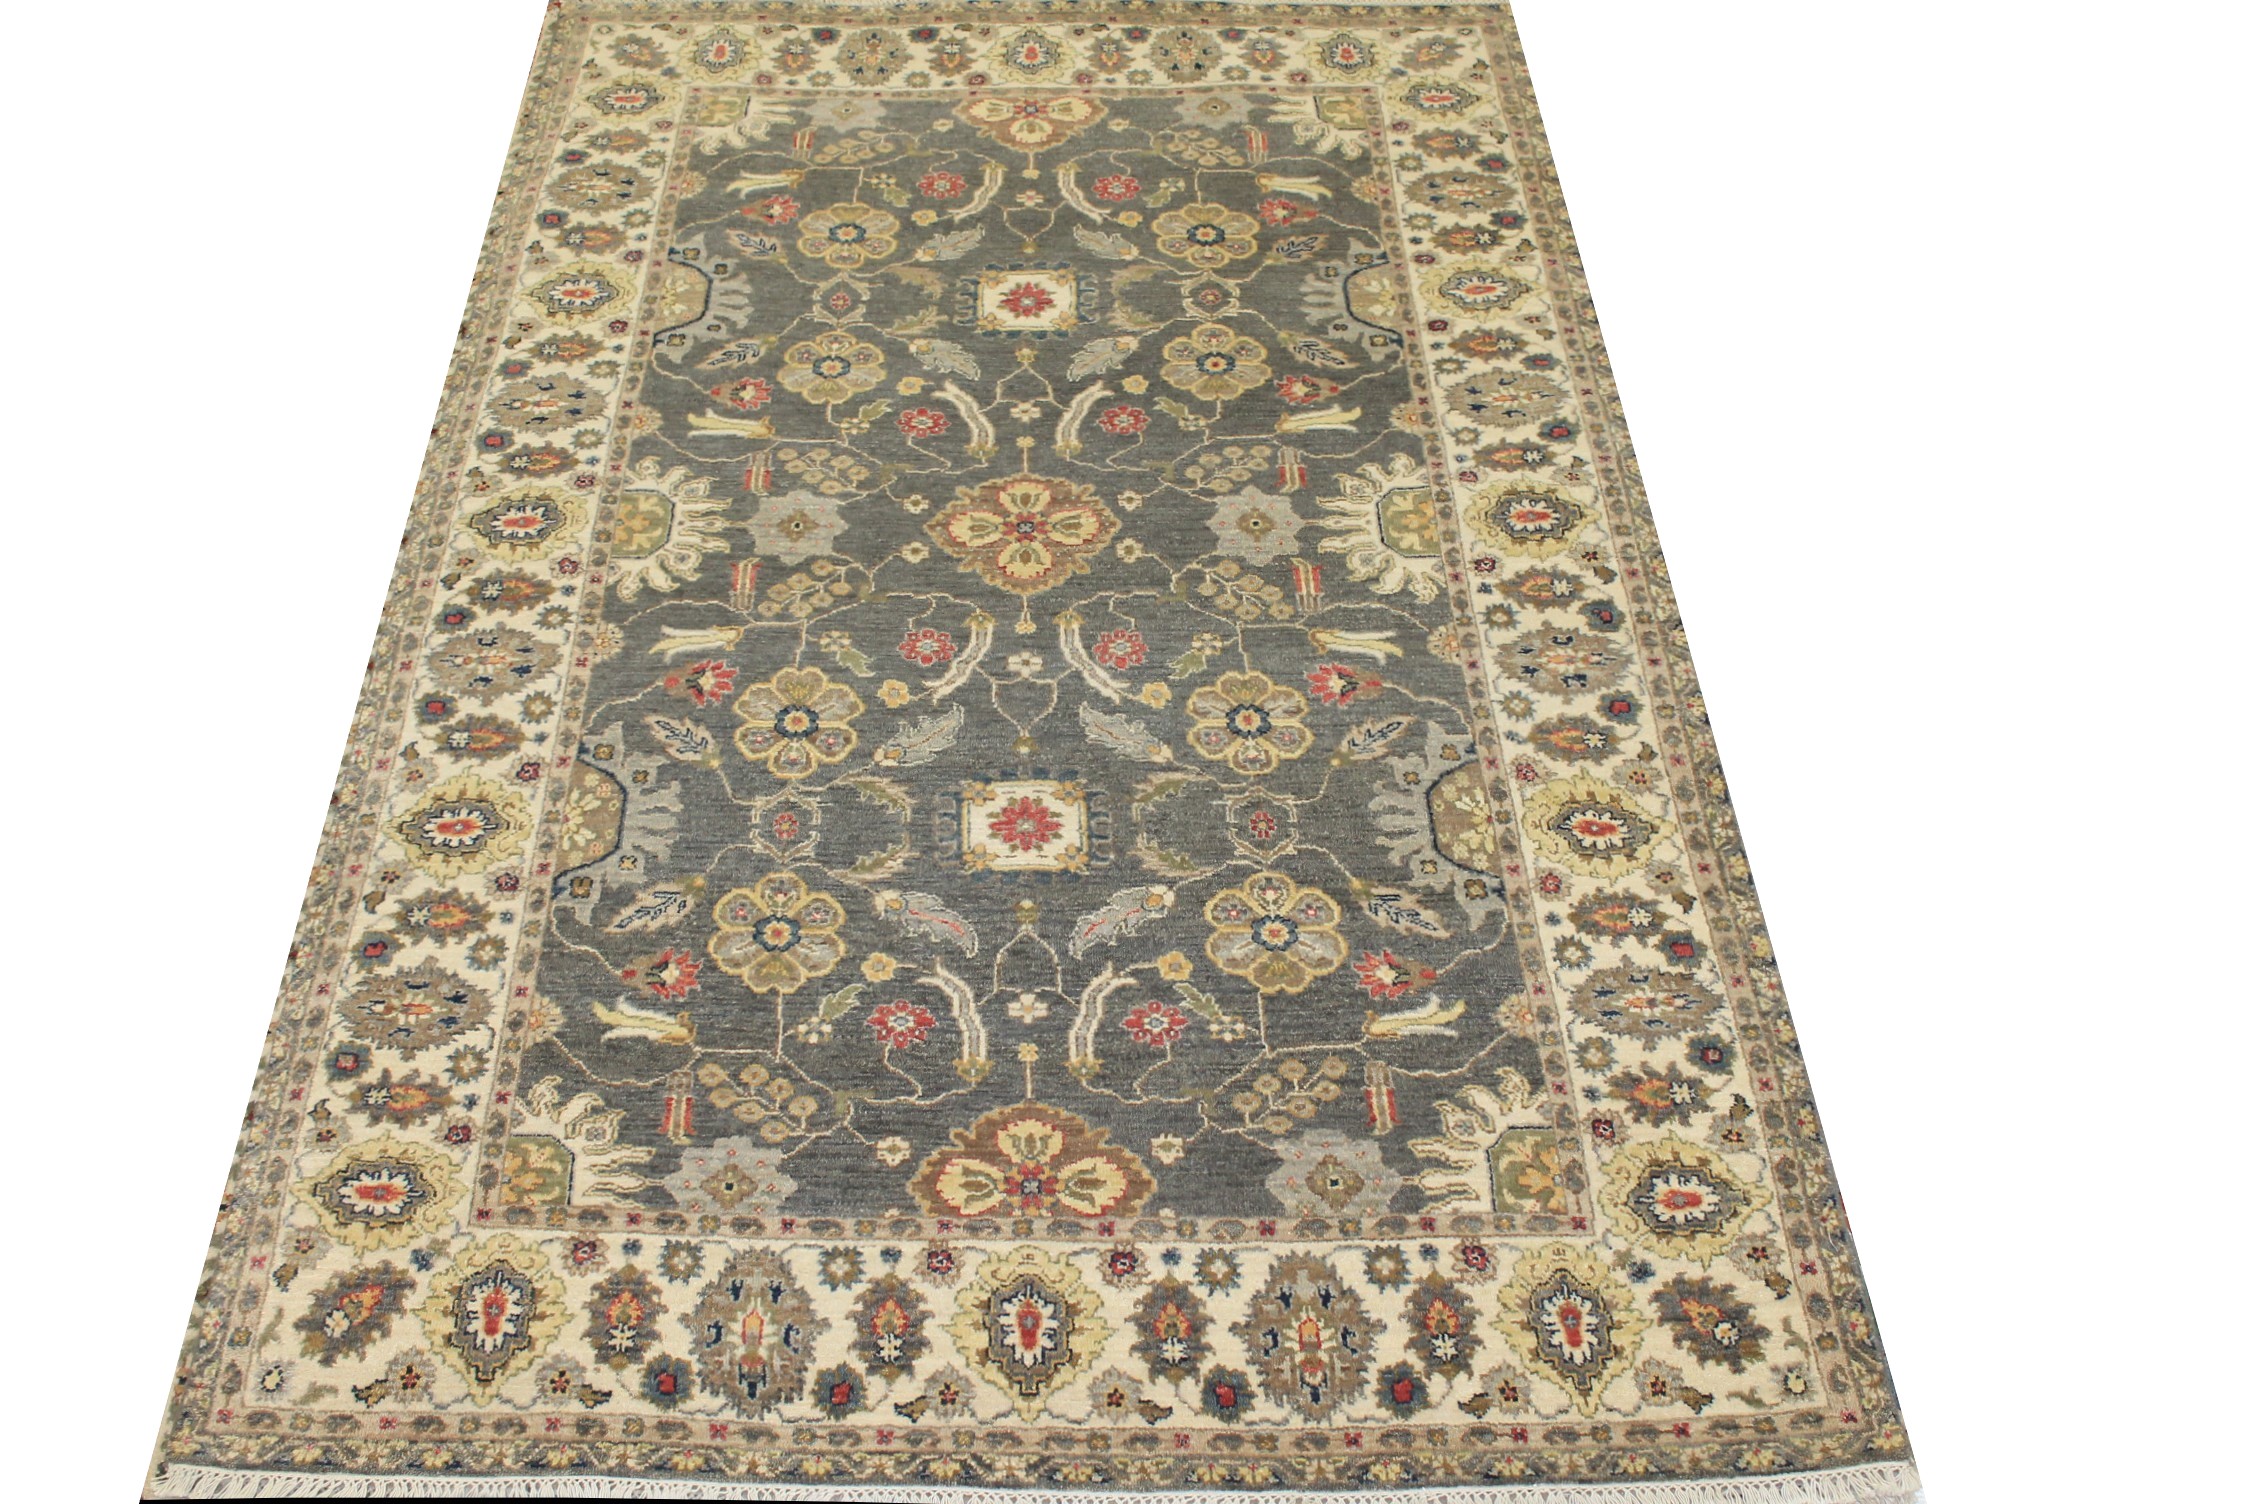 5x7/8 Traditional Hand Knotted Wool Area Rug - MR025051